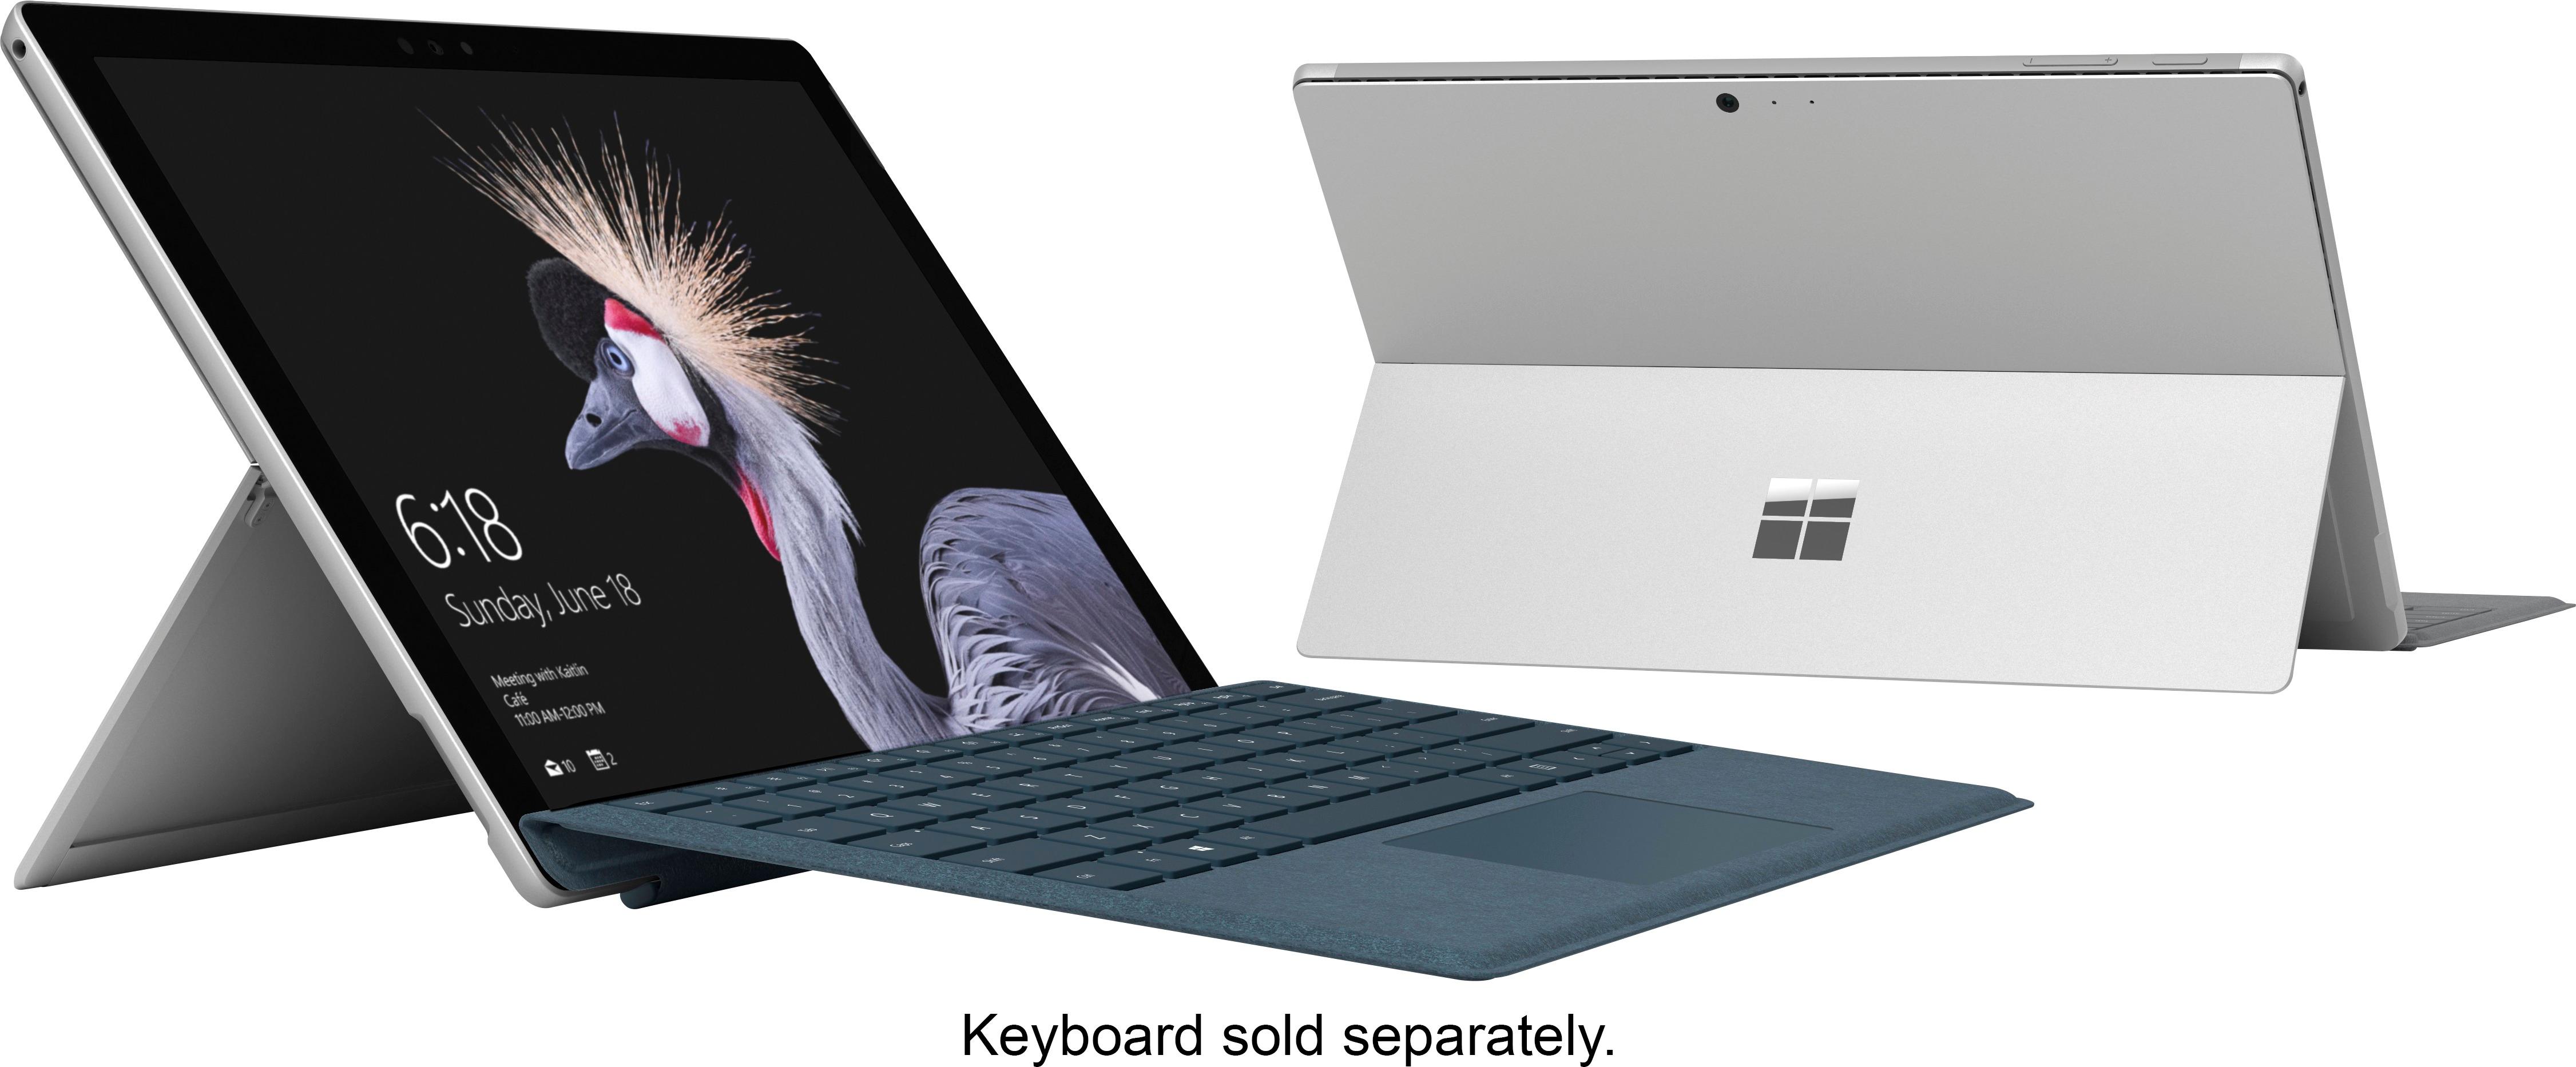 PC/タブレット タブレット Best Buy: Microsoft Surface Pro – 12.3” Touch-Screen – Intel Core 